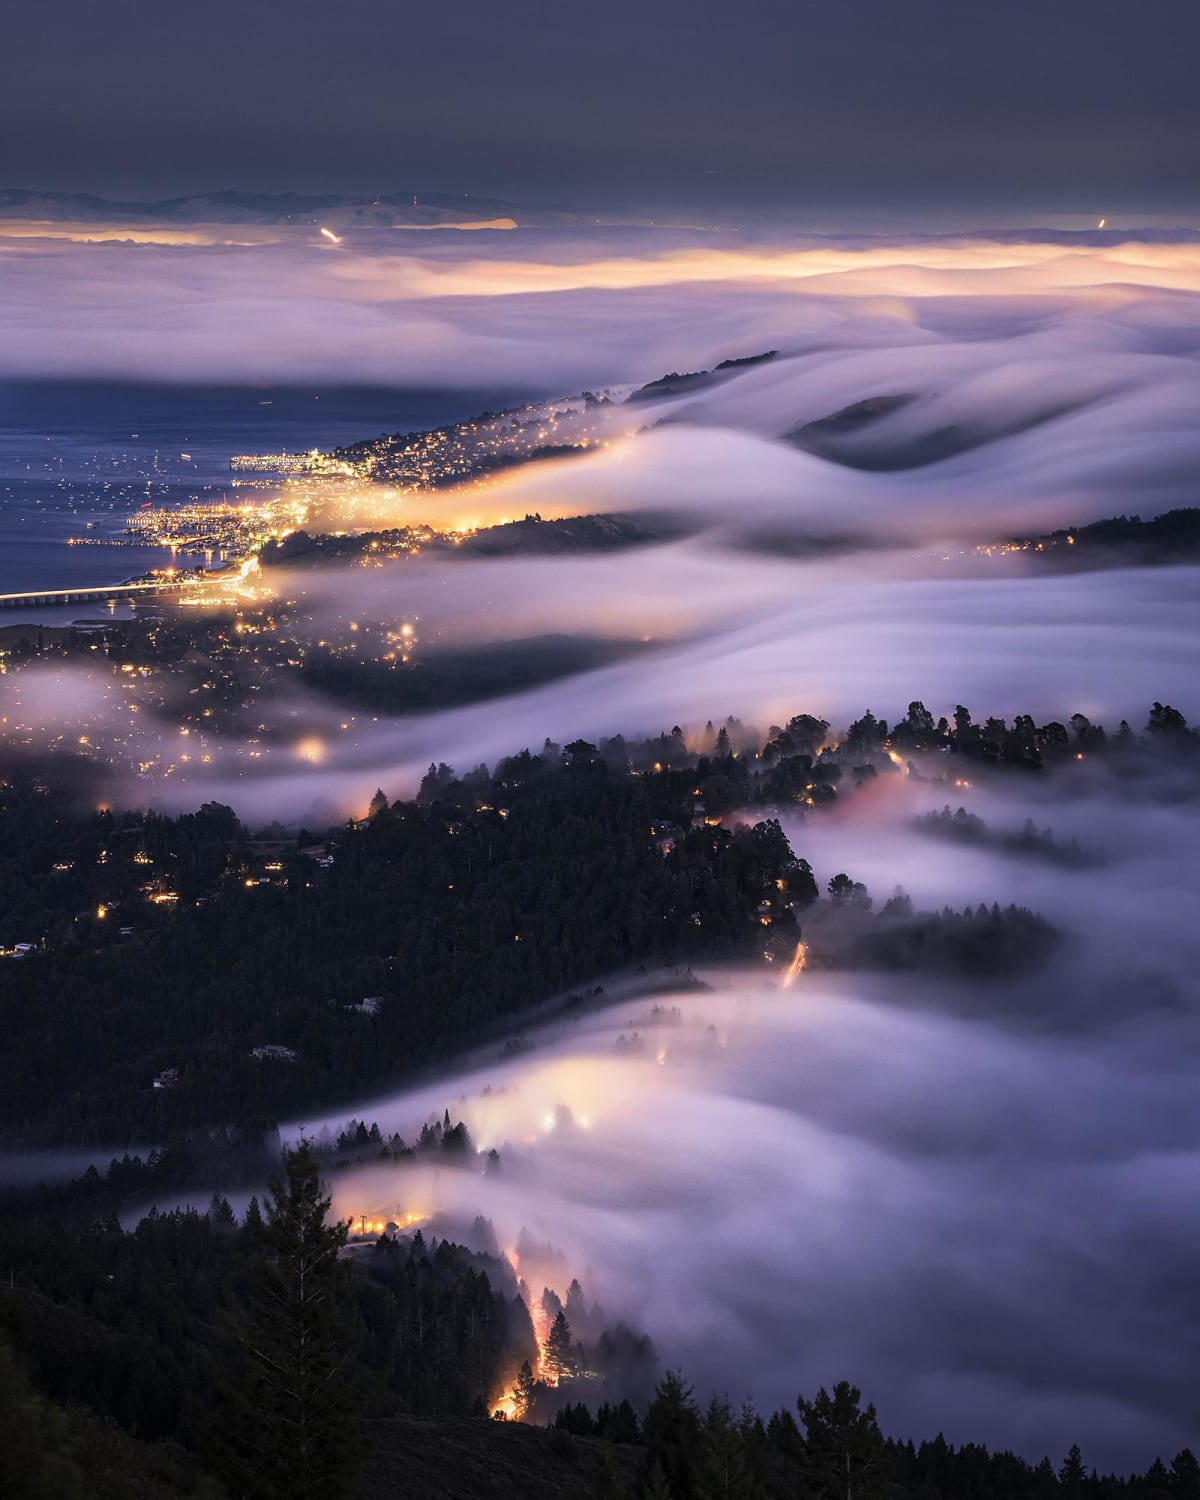 Fog rolls over the hills into the city of Sausalito, CA